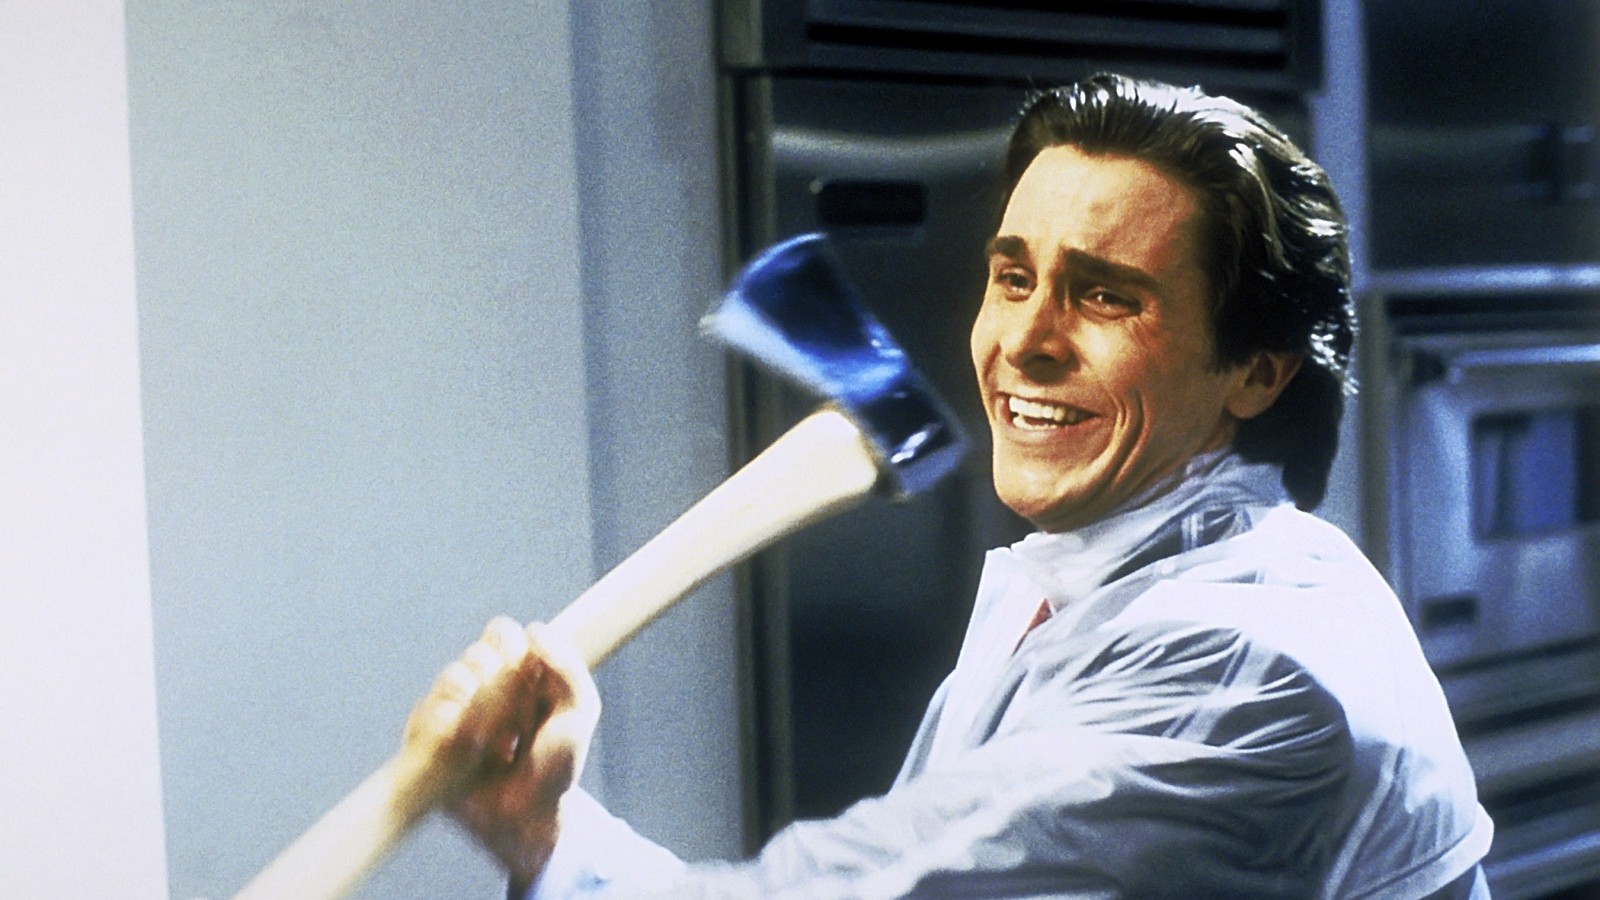 Christian Bale as the psychopathic Patrick Bateman in American Psycho